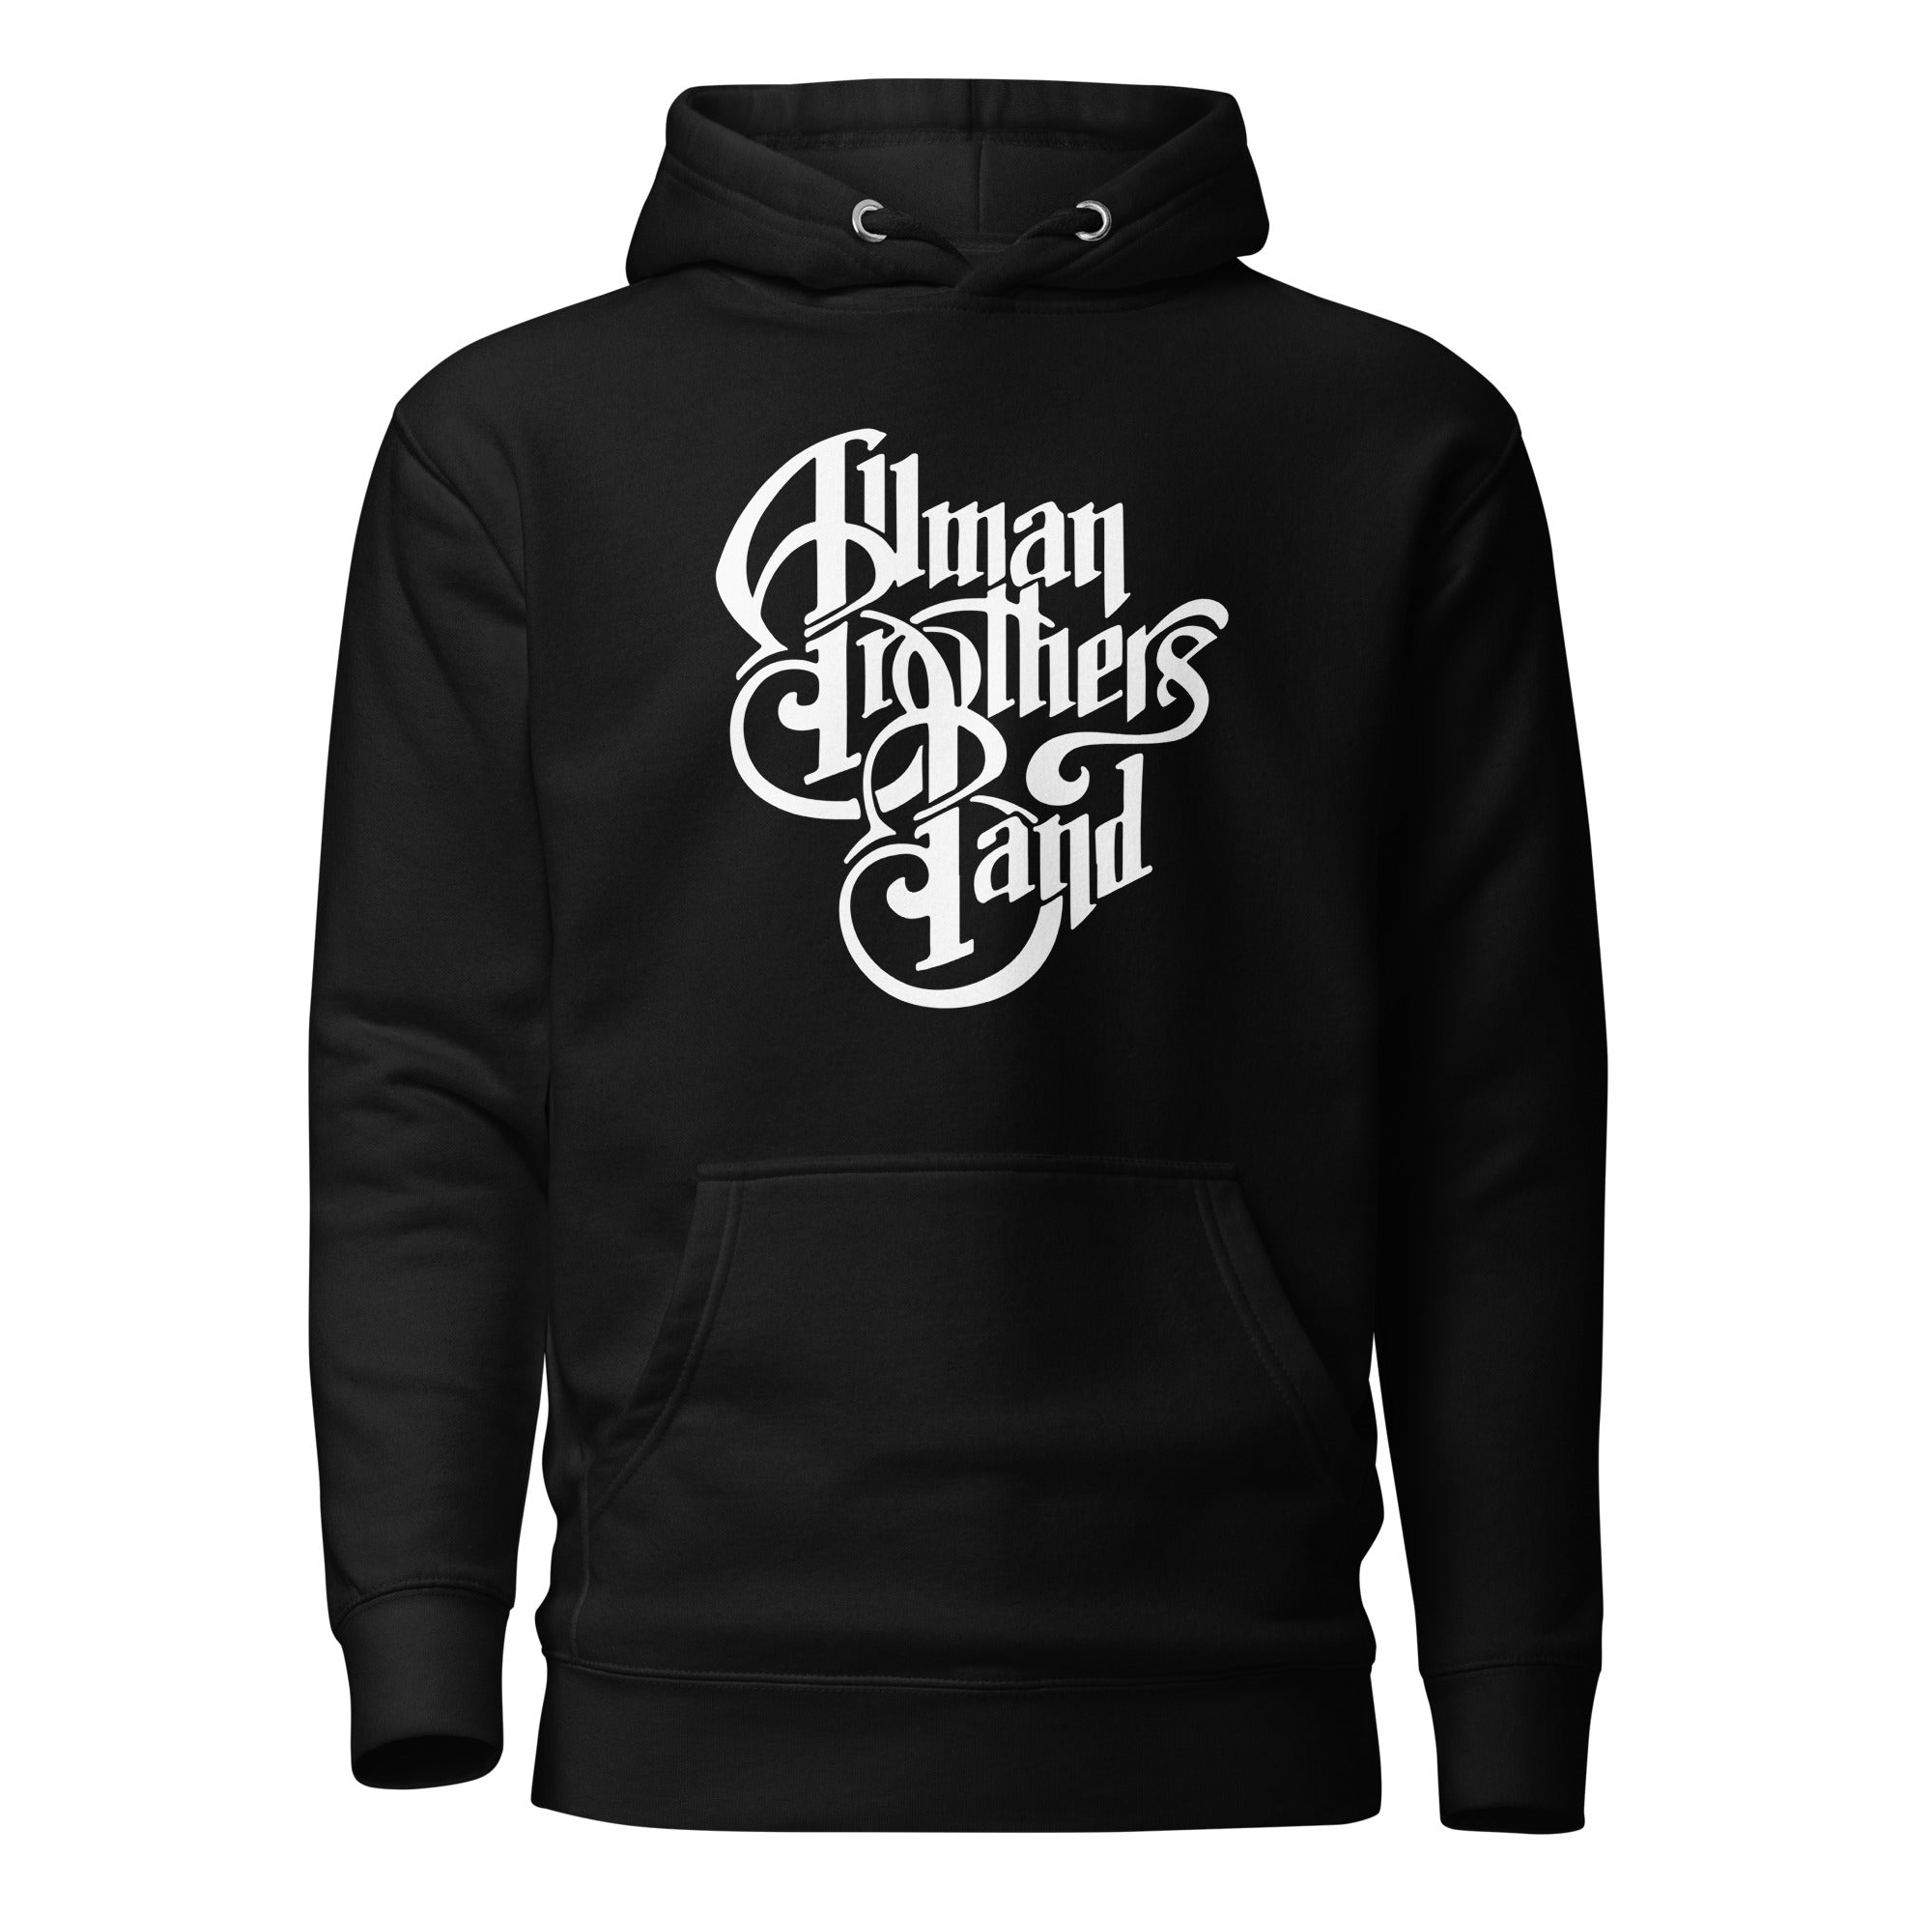 The Allman Brothers Band Classic Black & White Hoodie - Section 119